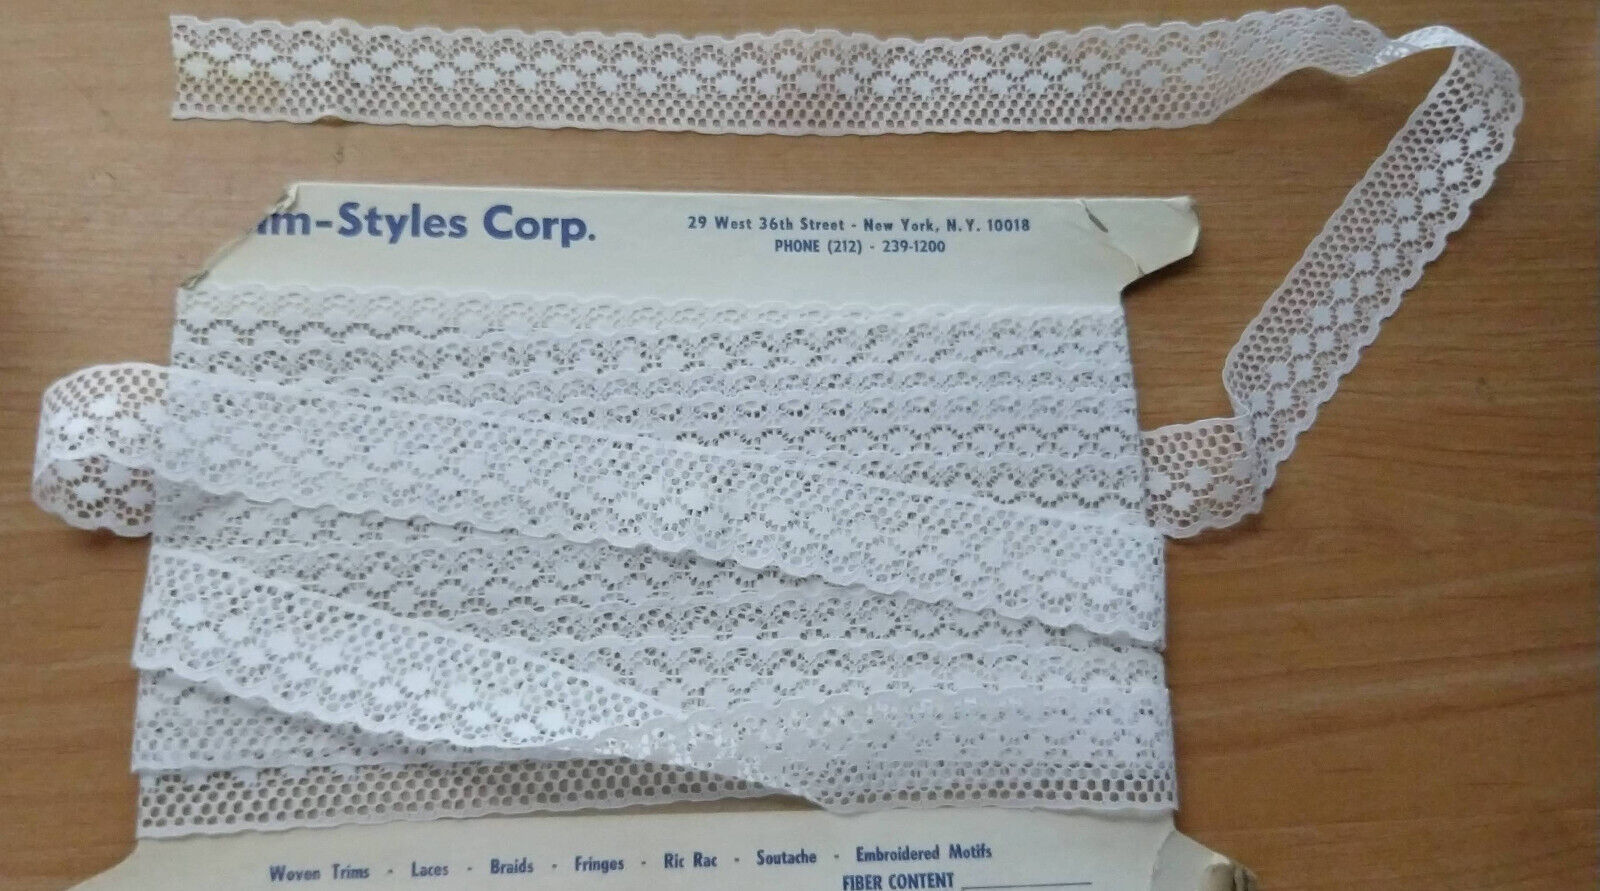 Lot of Lovely Vintage White Lace Sewing Trim 14 Feet  Nice for Crafts Dolls